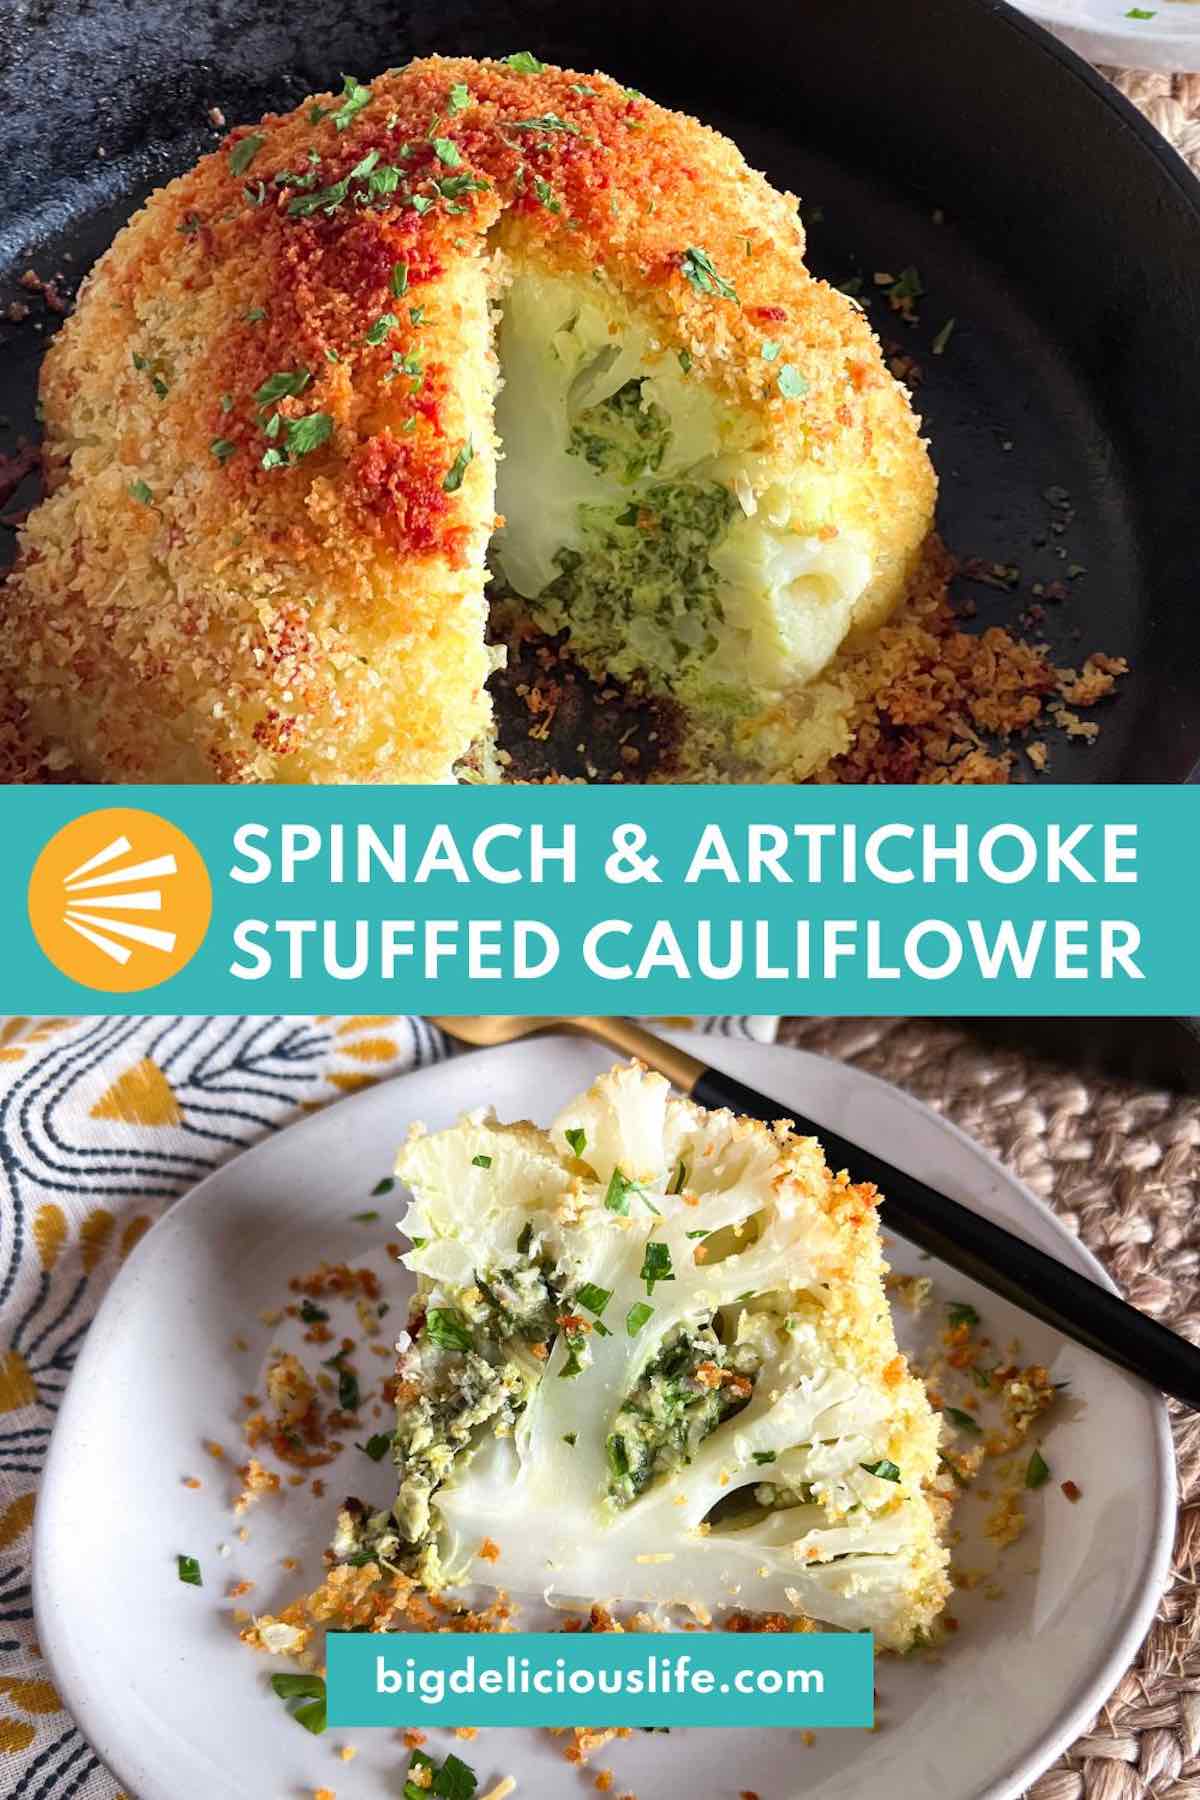 Branded Pinterest template with photos of whole stuffed cauliflower and slice.